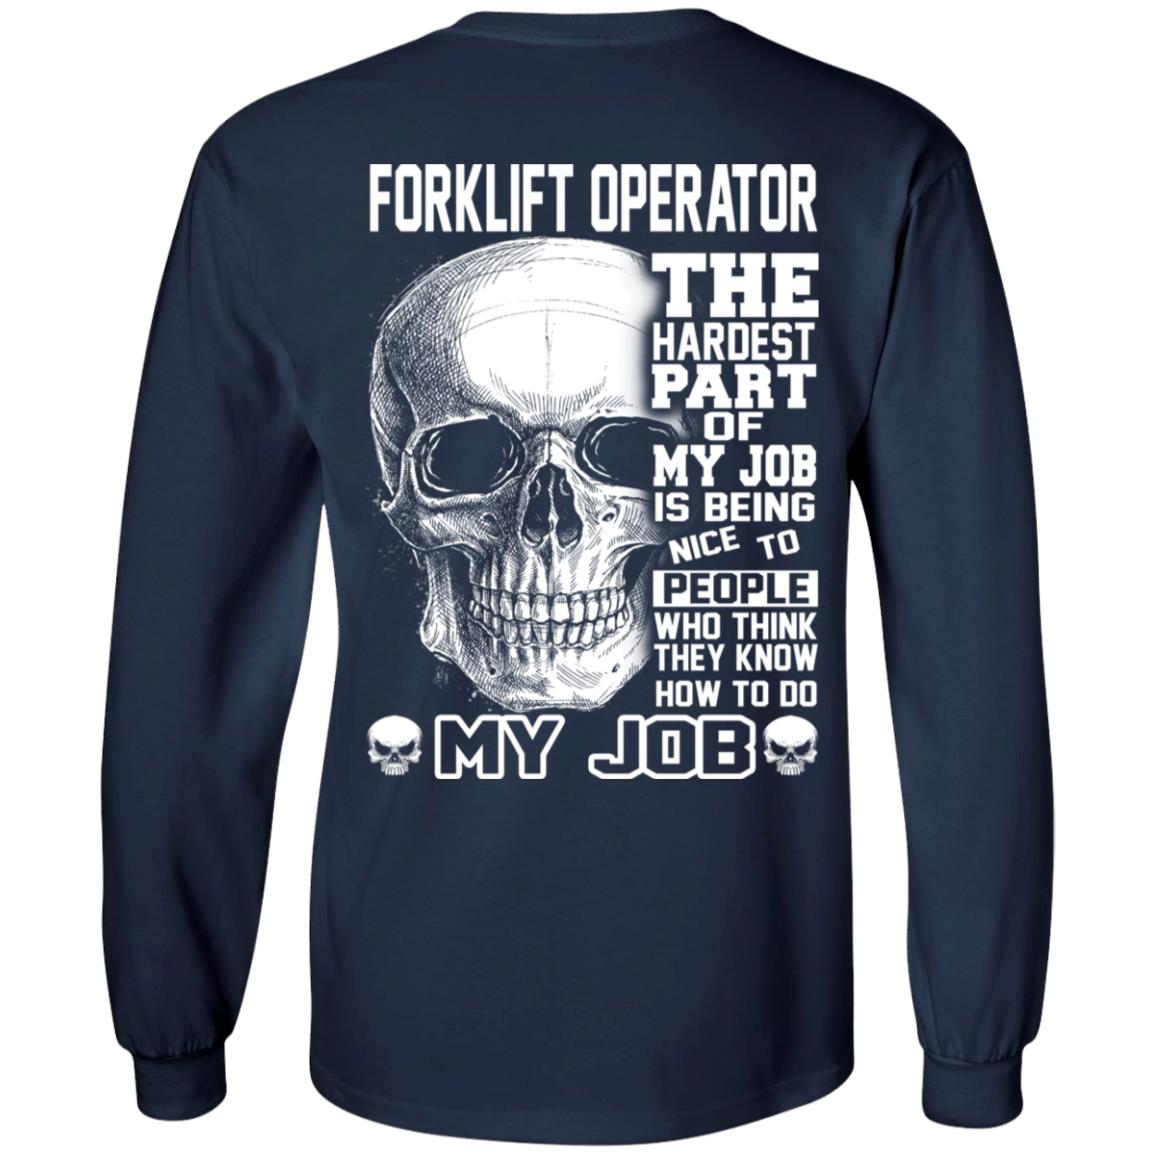 Forklift Operator The Hardest Part Of My Job Is Being Nice To People T Shirts Hoodie Tank 0stees